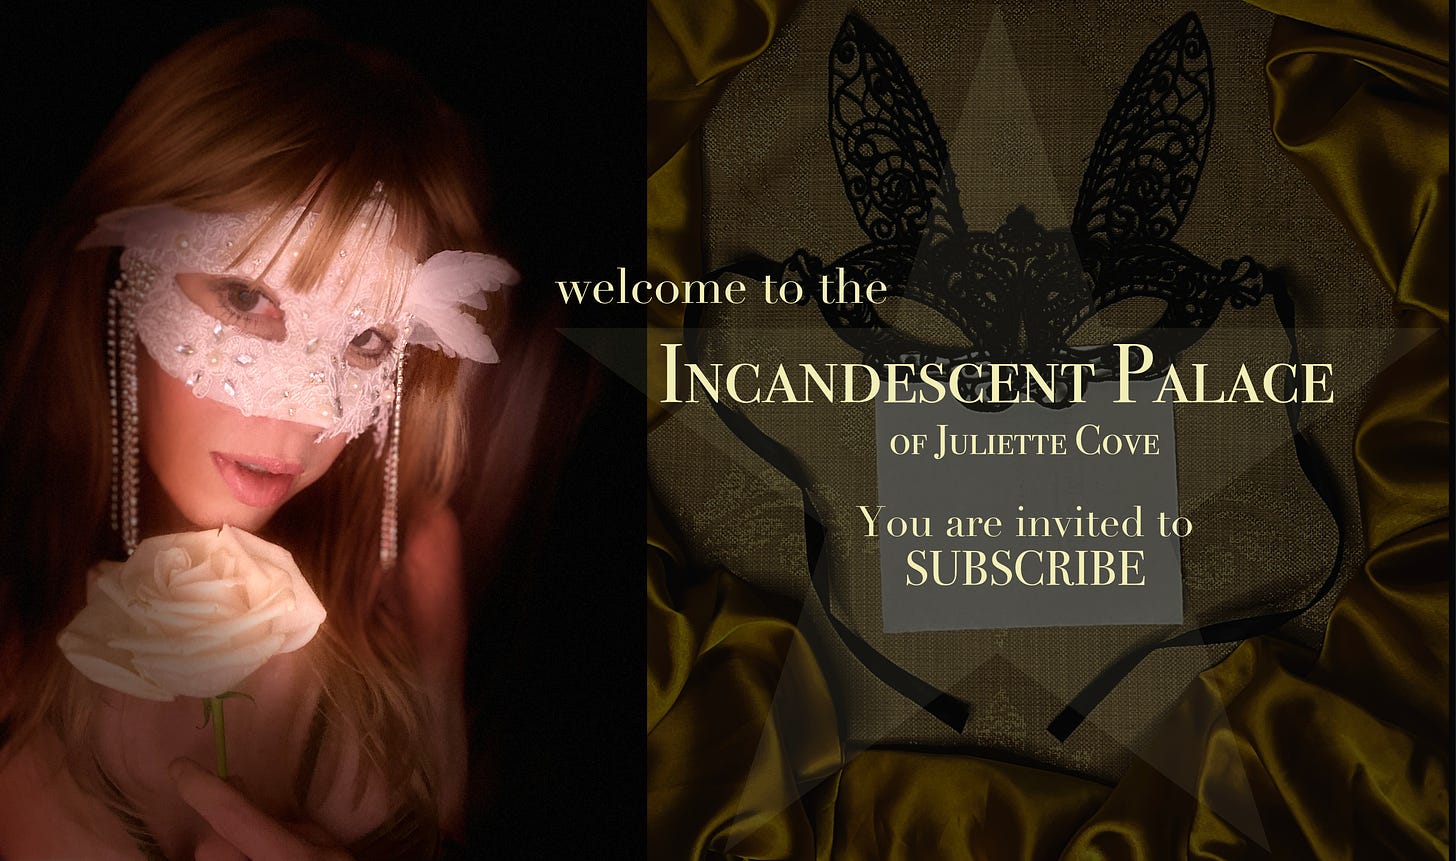 Welcome to the Incandescent Palace of Juliette Cove. You are invited to subscribe.